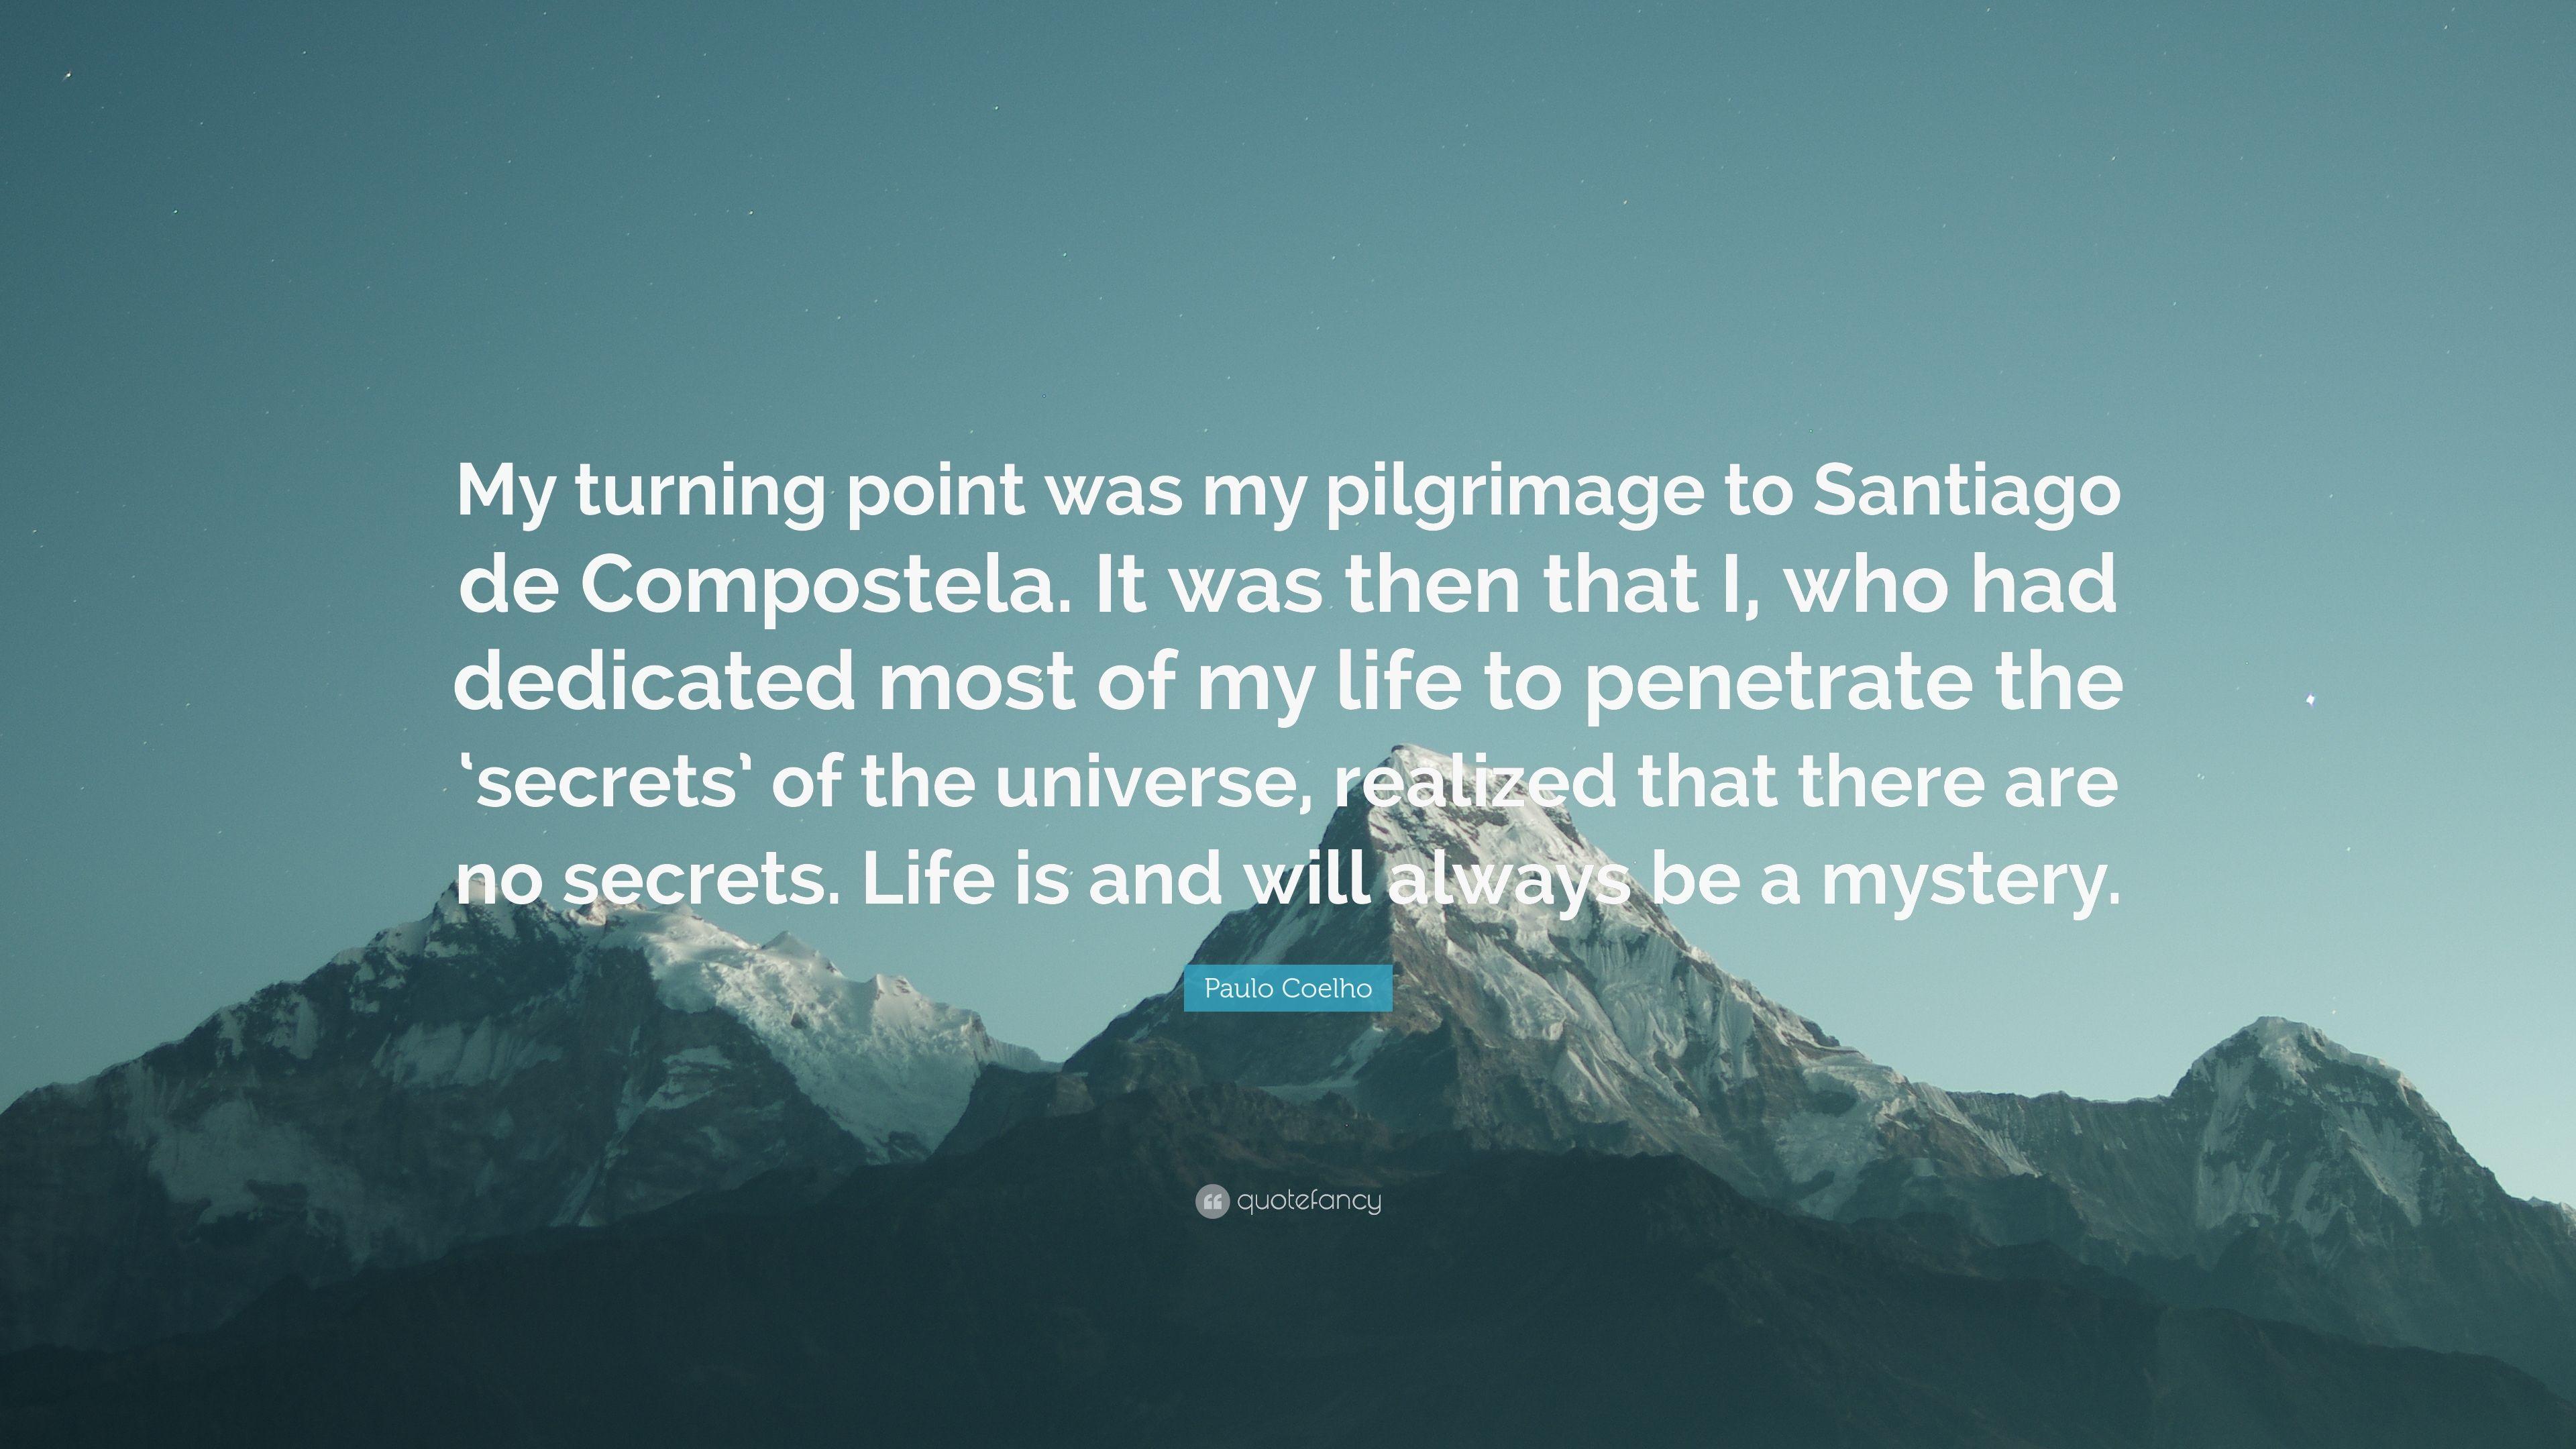 Paulo Coelho Quote: “My turning point was my pilgrimage to